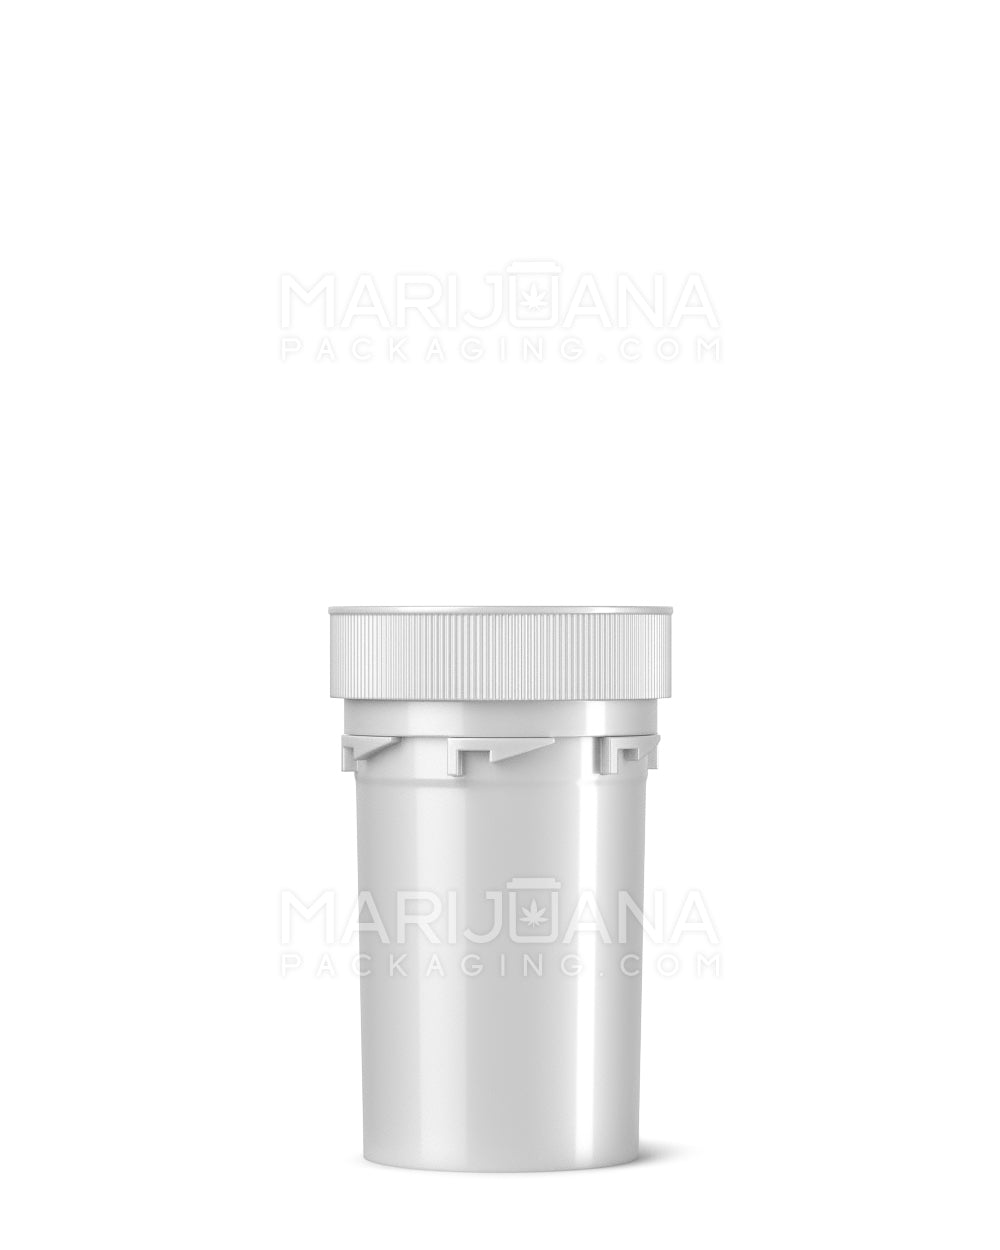 Child Resistant | Opaque Silver Blank Reversible Cap Vials | 20dr - 3.5g - 240 Count - 2